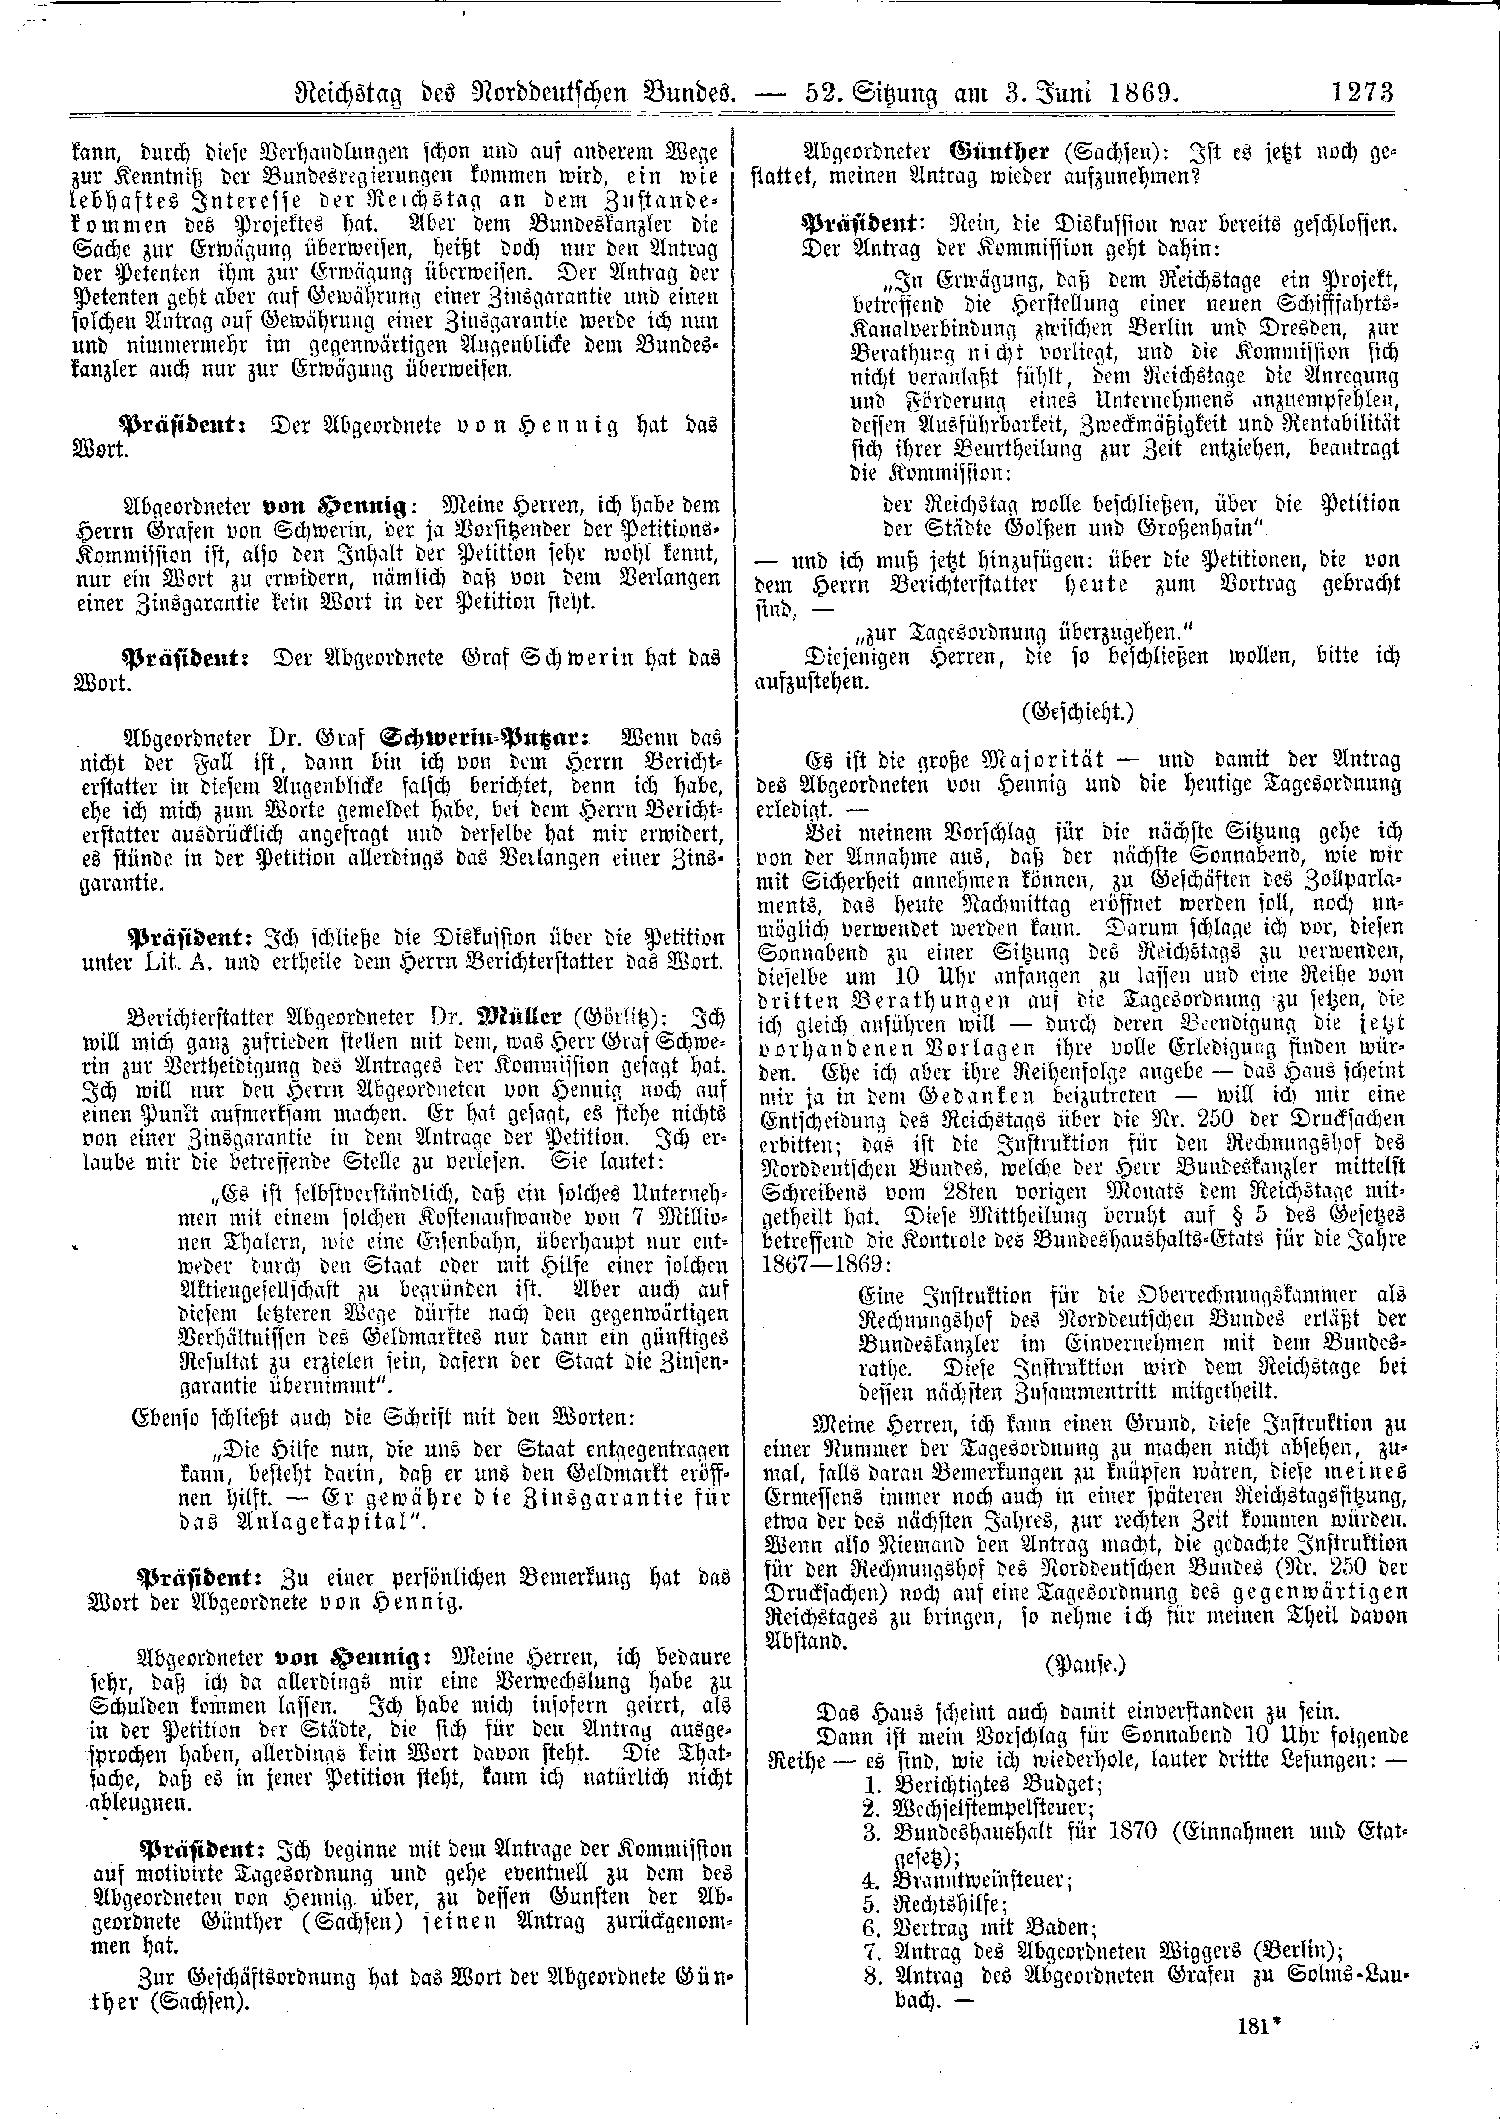 Scan of page 1273